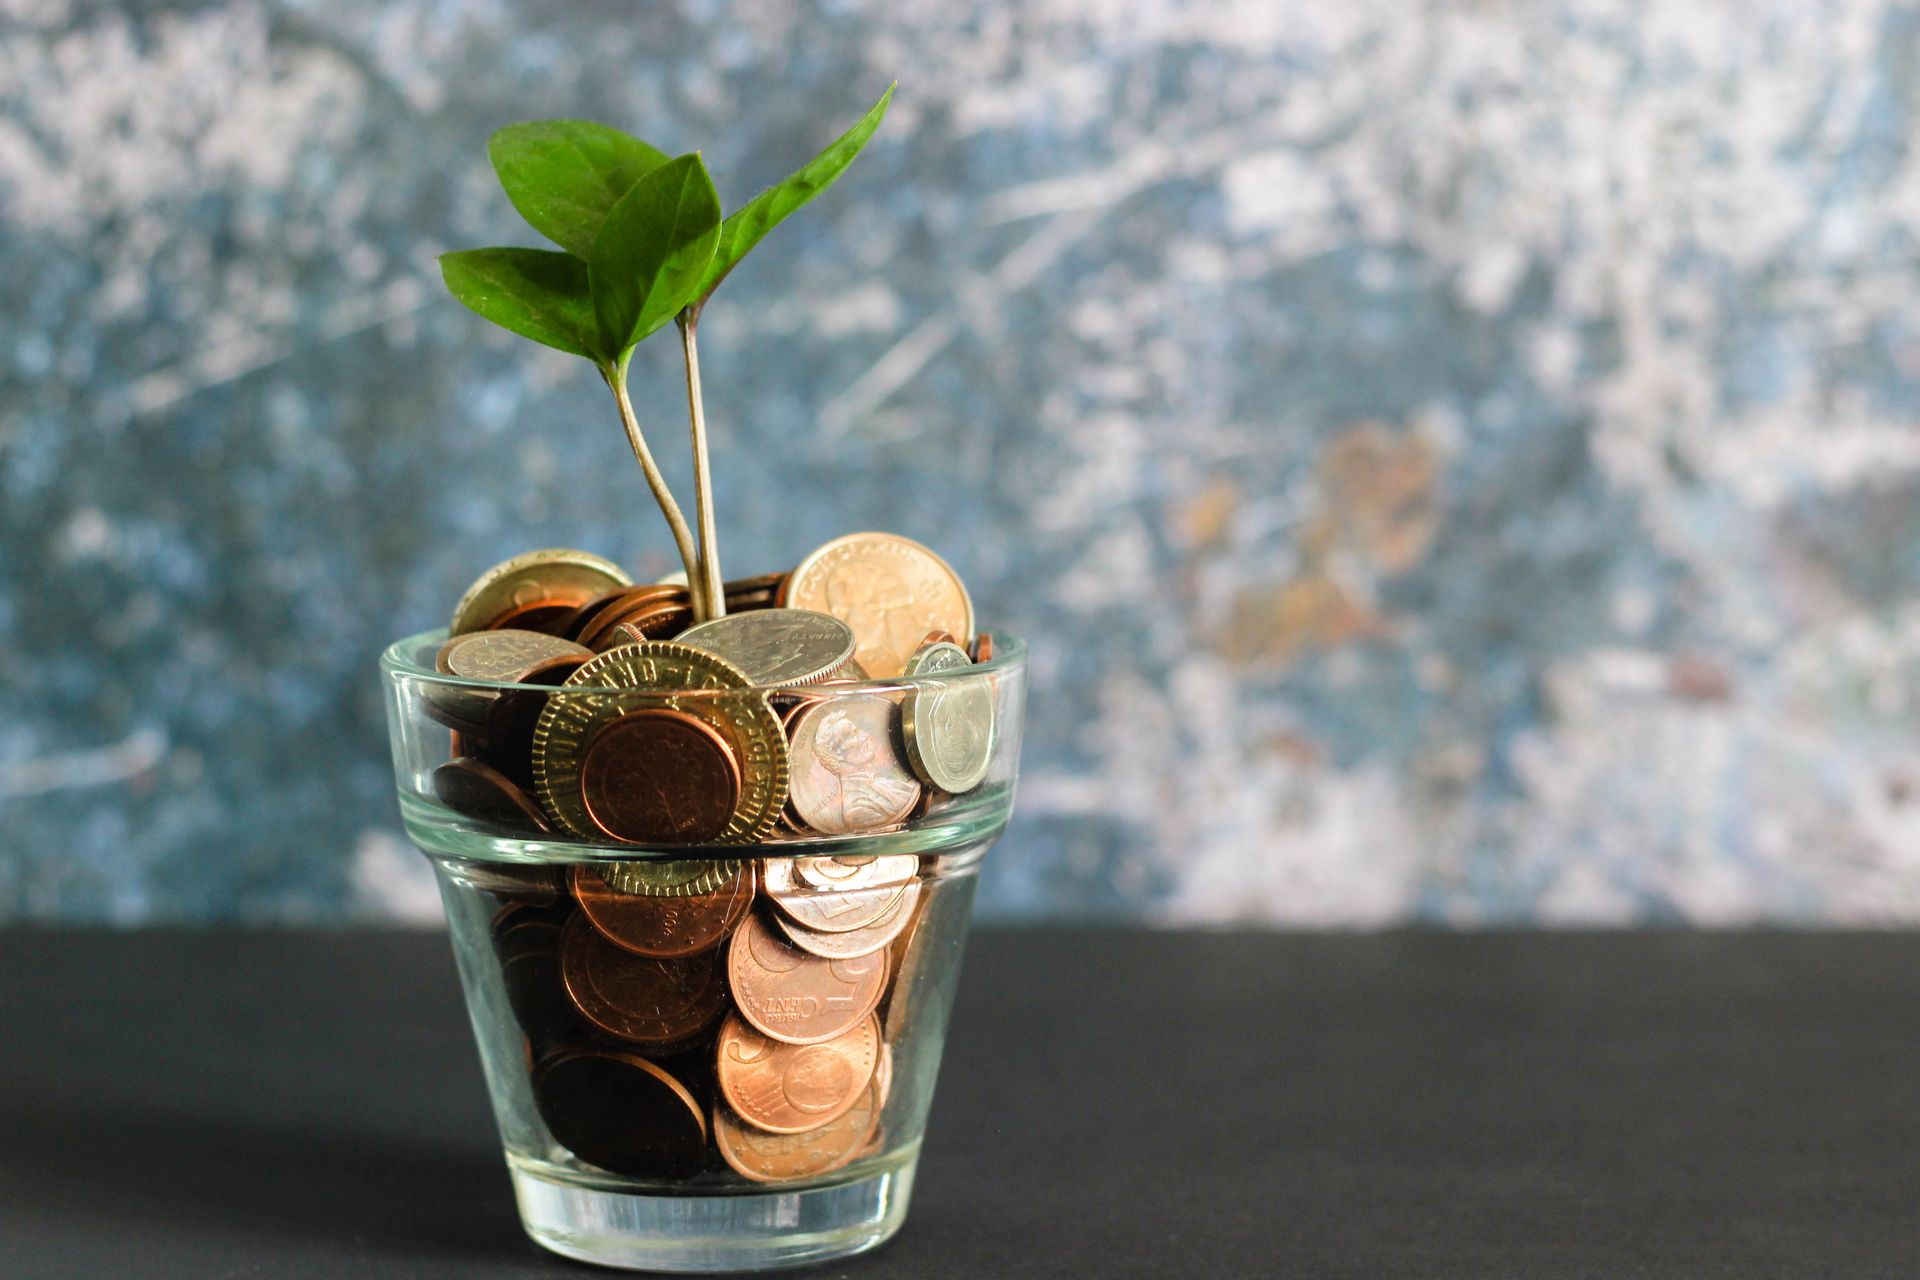 Talking money - change in a glass with plant growing out